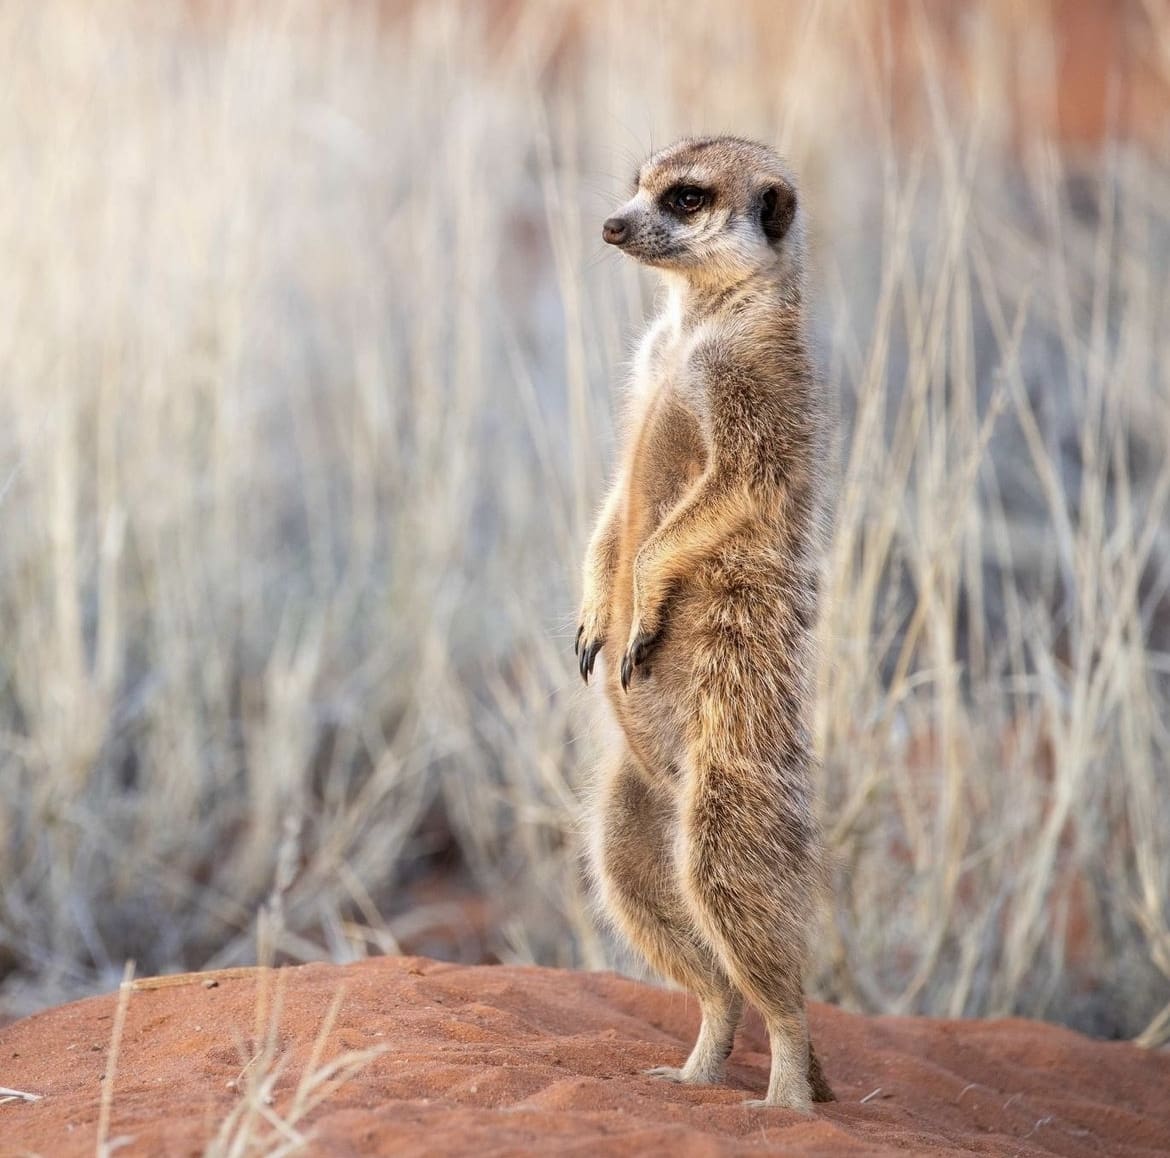 A lone meerkat stands on its hind legs as it scans the surrounding area